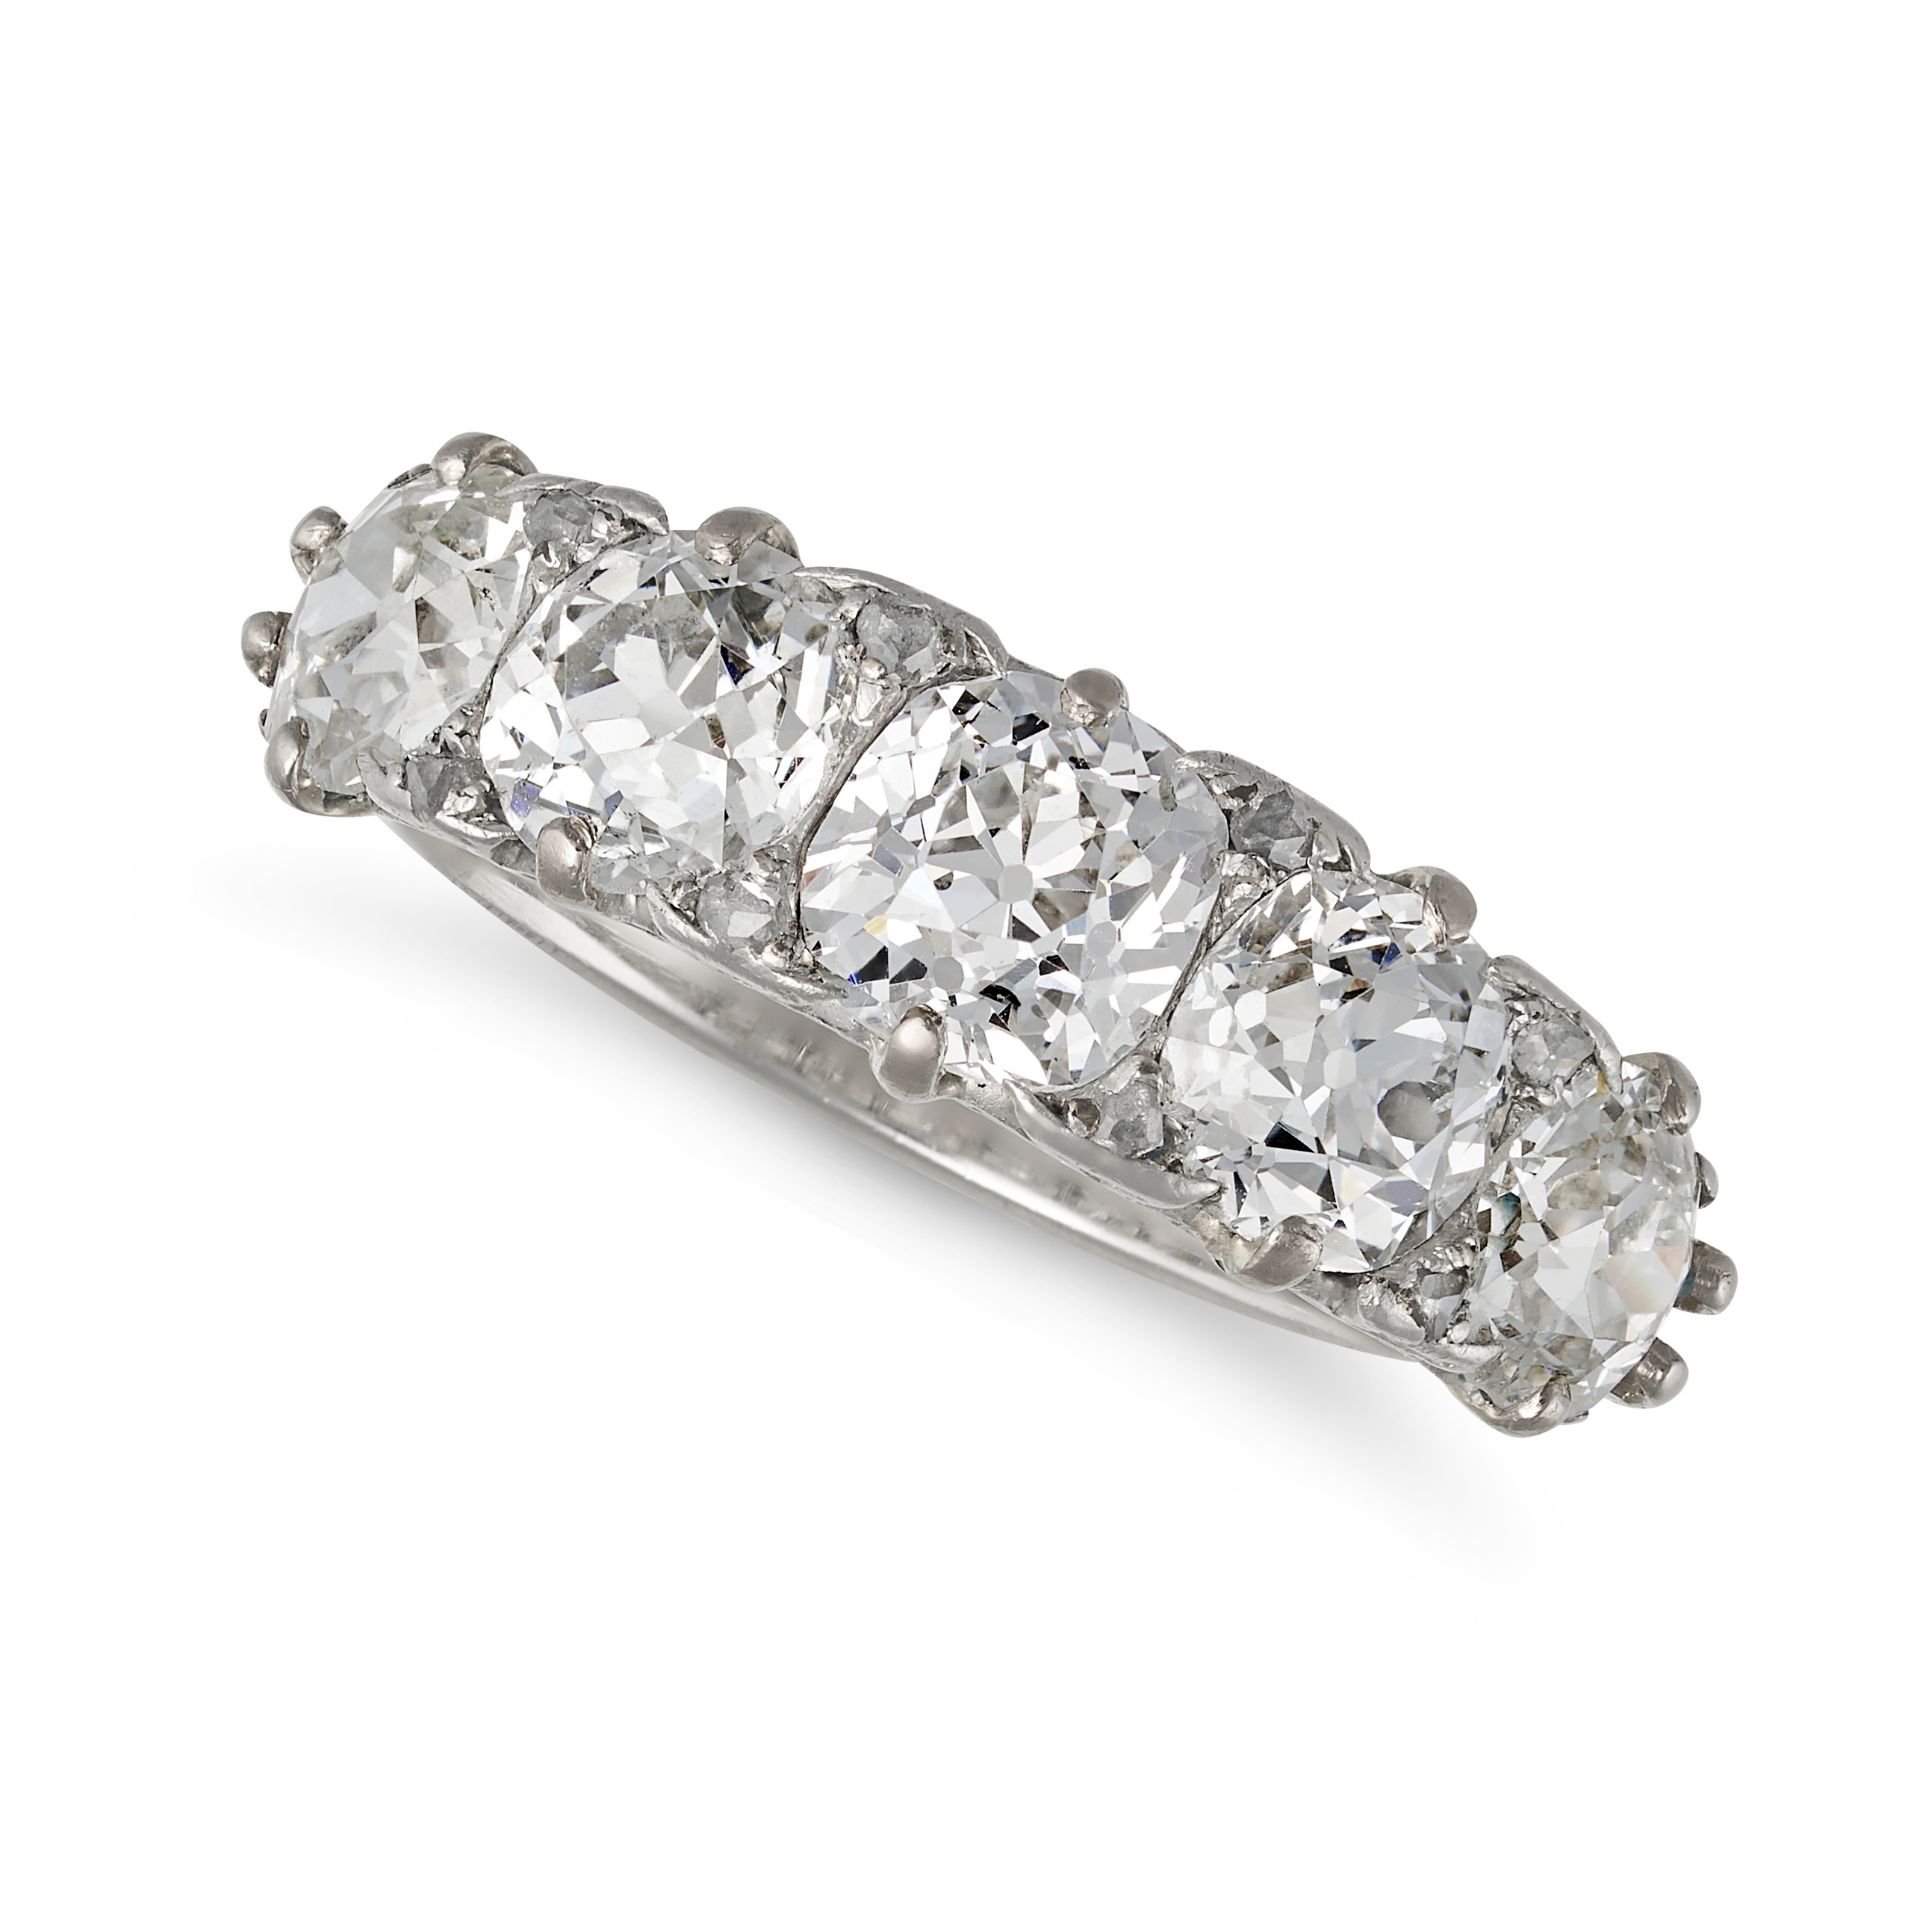 A FINE ANTIQUE DIAMOND FIVE STONE RING, EARLY 20TH CENTURY in platinum, set with a row of five gr...